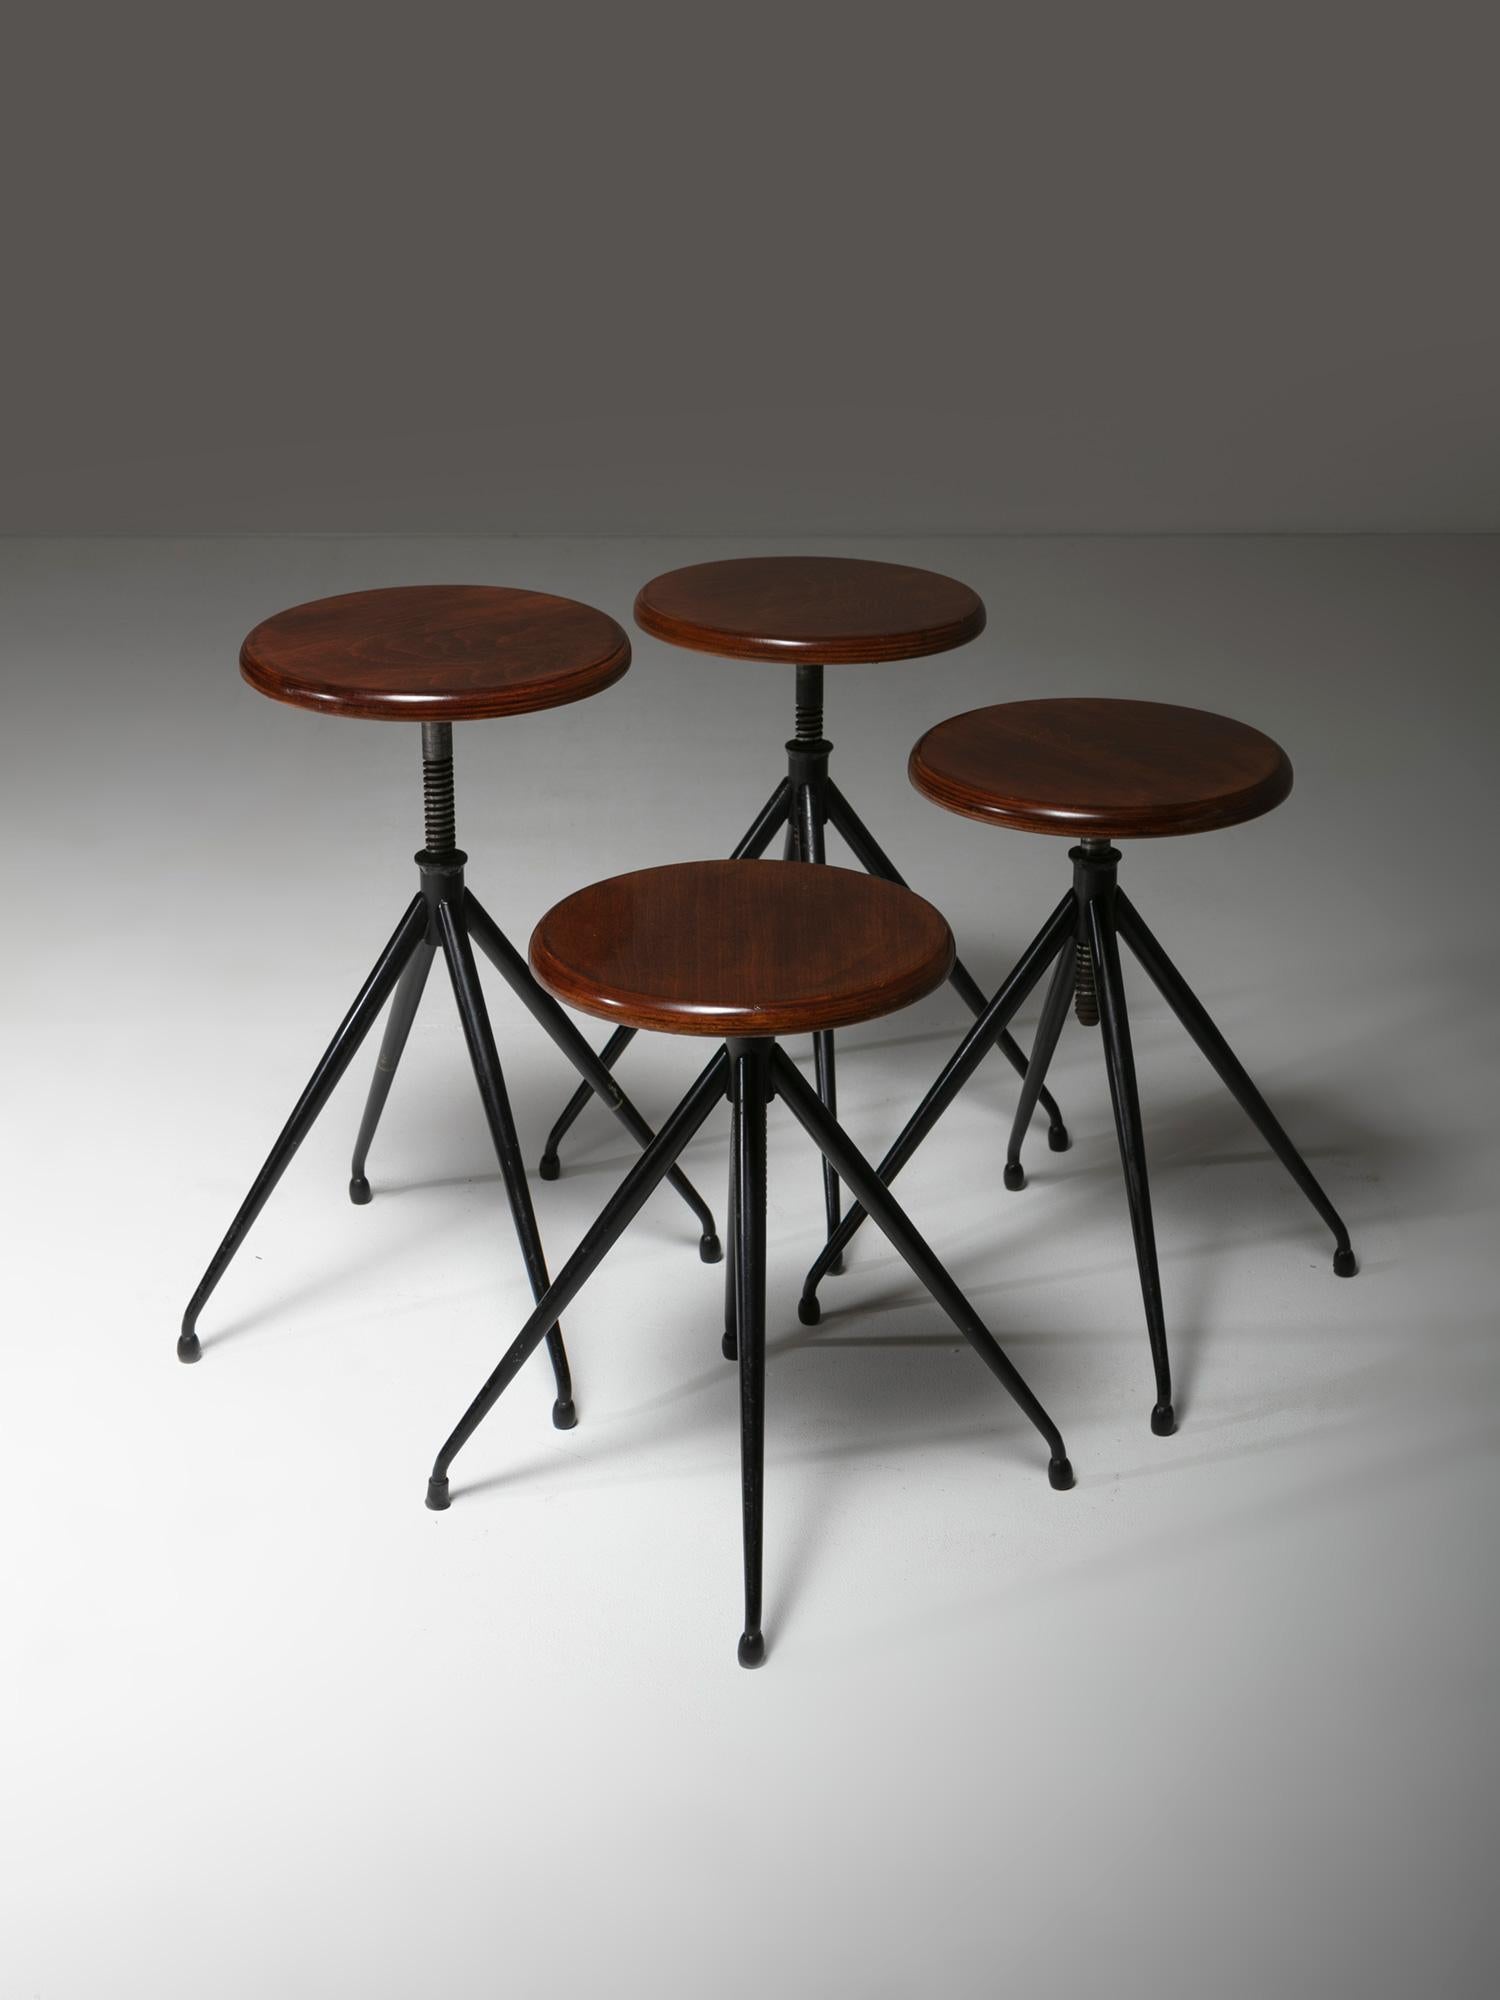 Four black lacquered stools by Gastone Rinaldi for RIMA.
Adjustable version with adjustable polished plywood seat.